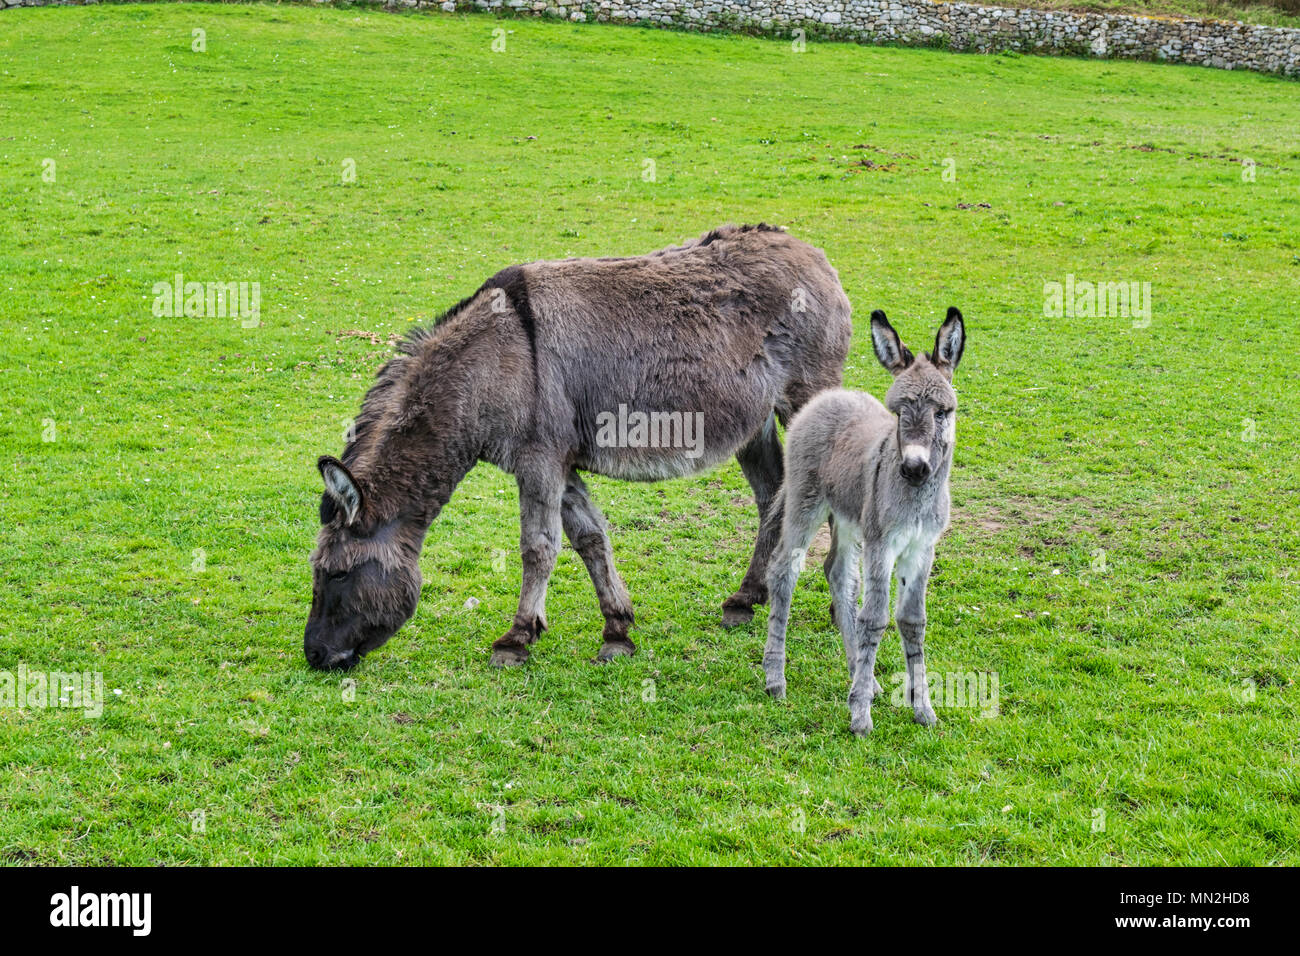 A mother Donkey and her baby Foal in a field Stock Photo